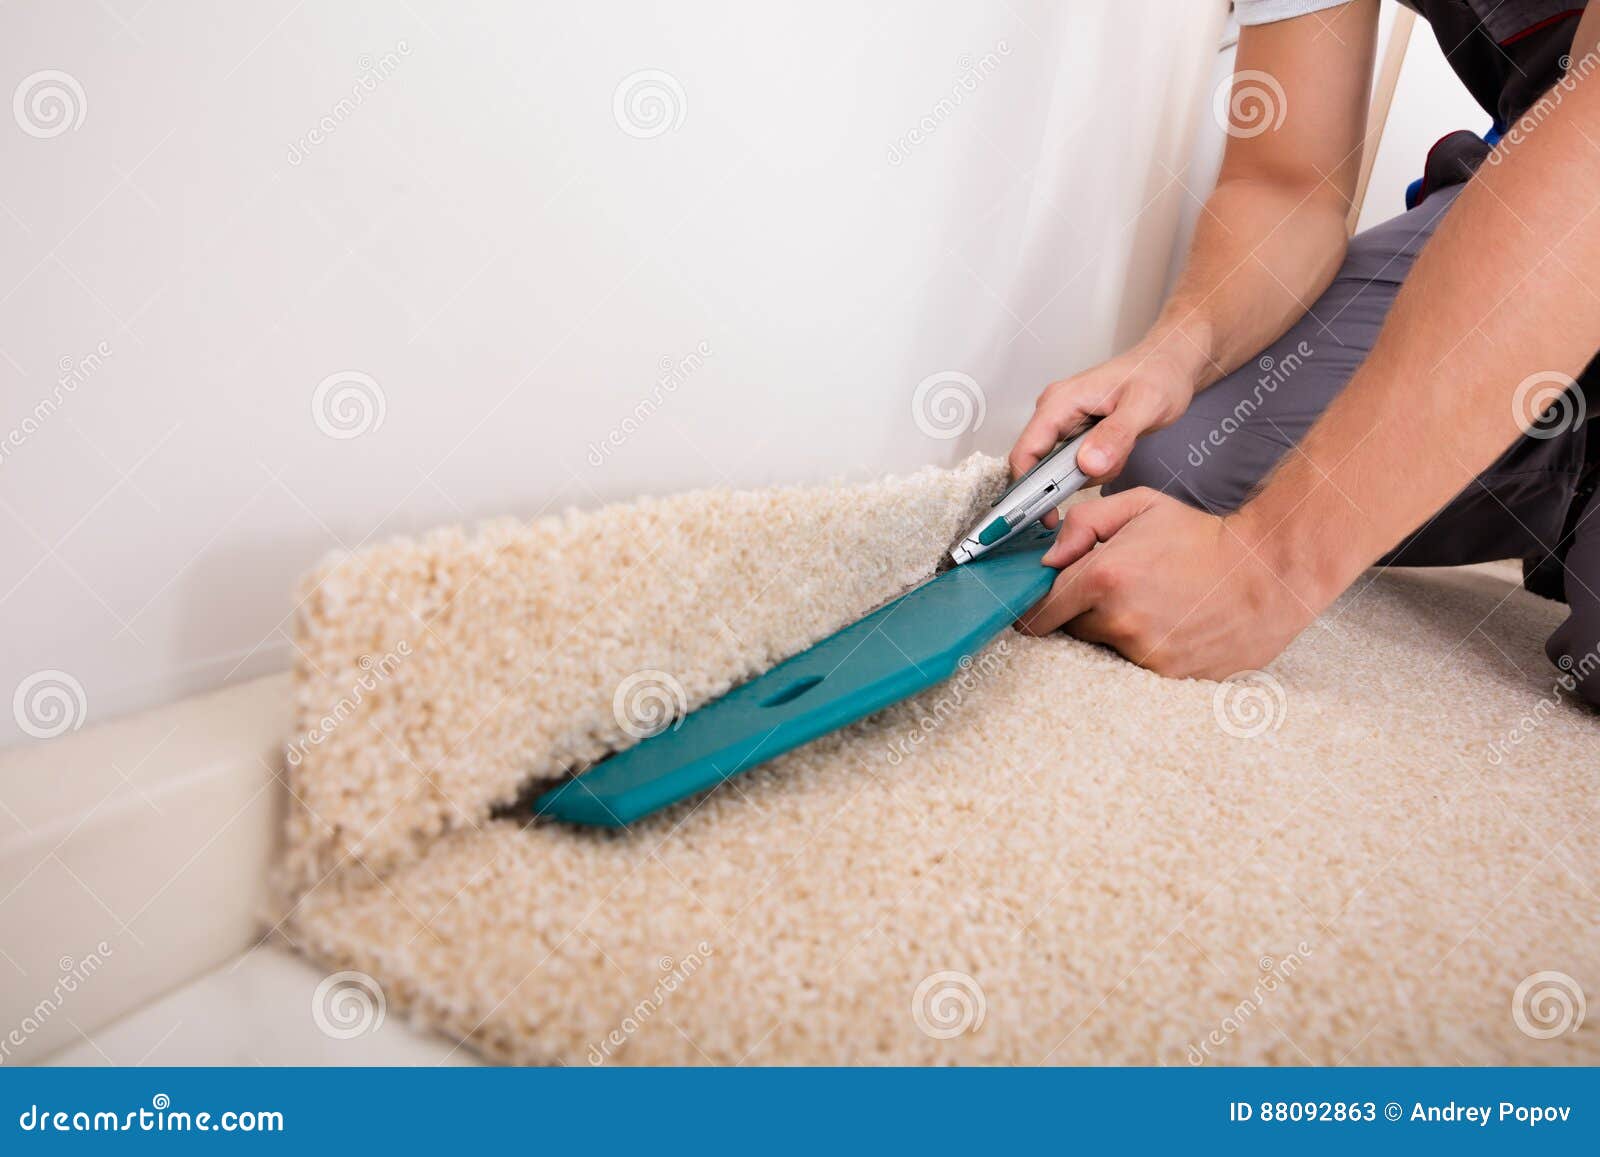 person cutting carpet with cutter